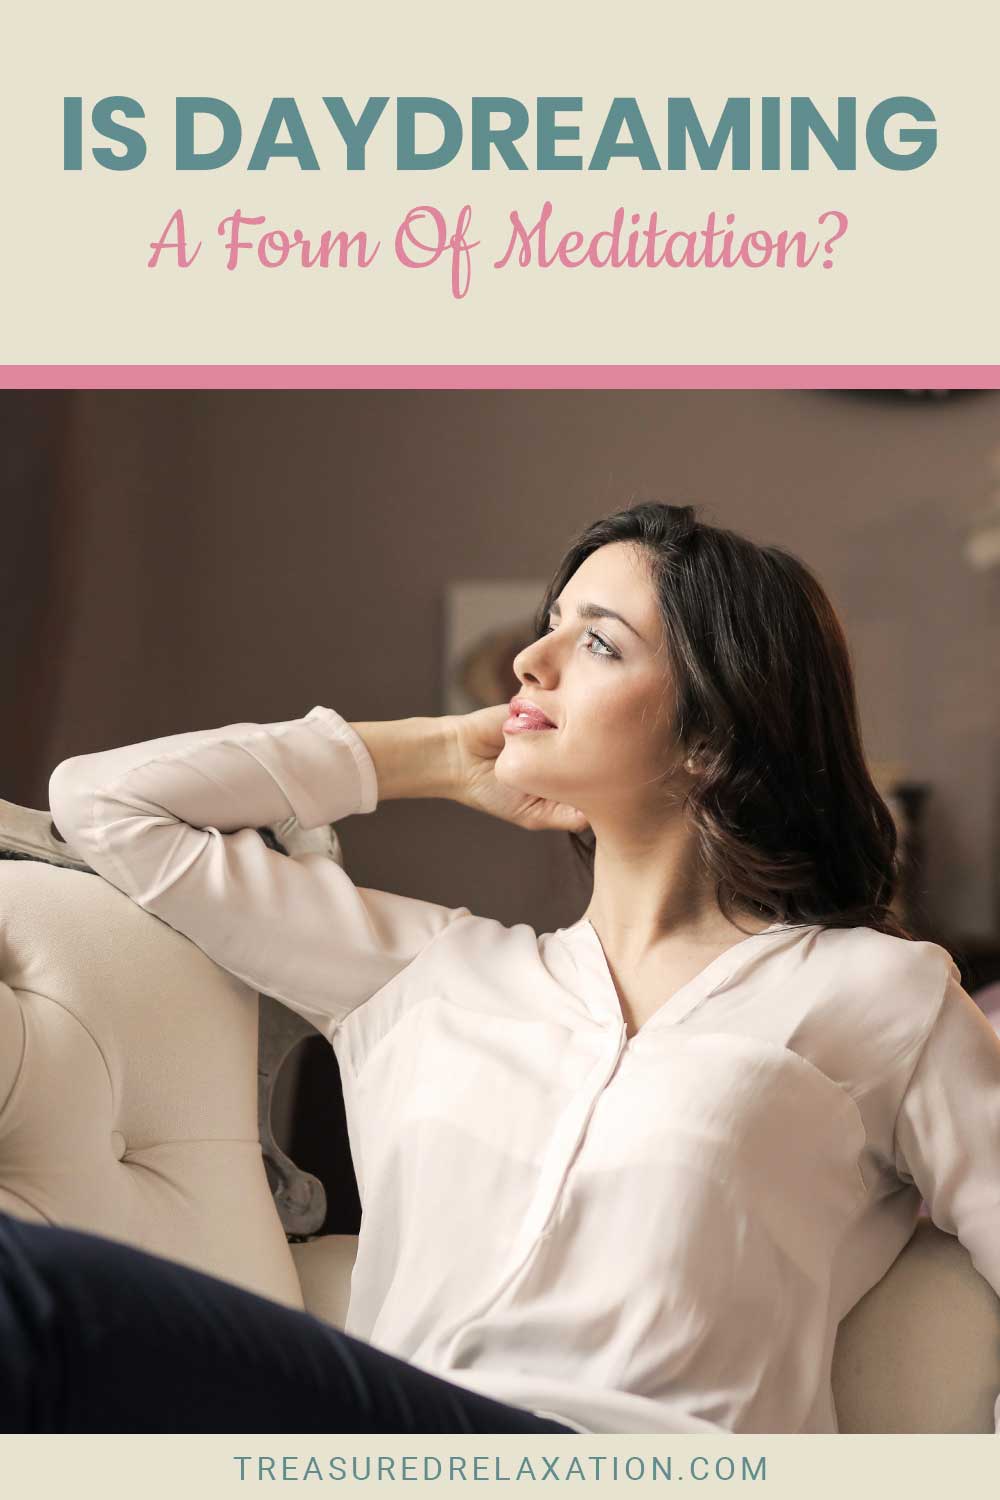 Woman wearing white shirt sitting on a cushion - When You Meditate You See Blue?